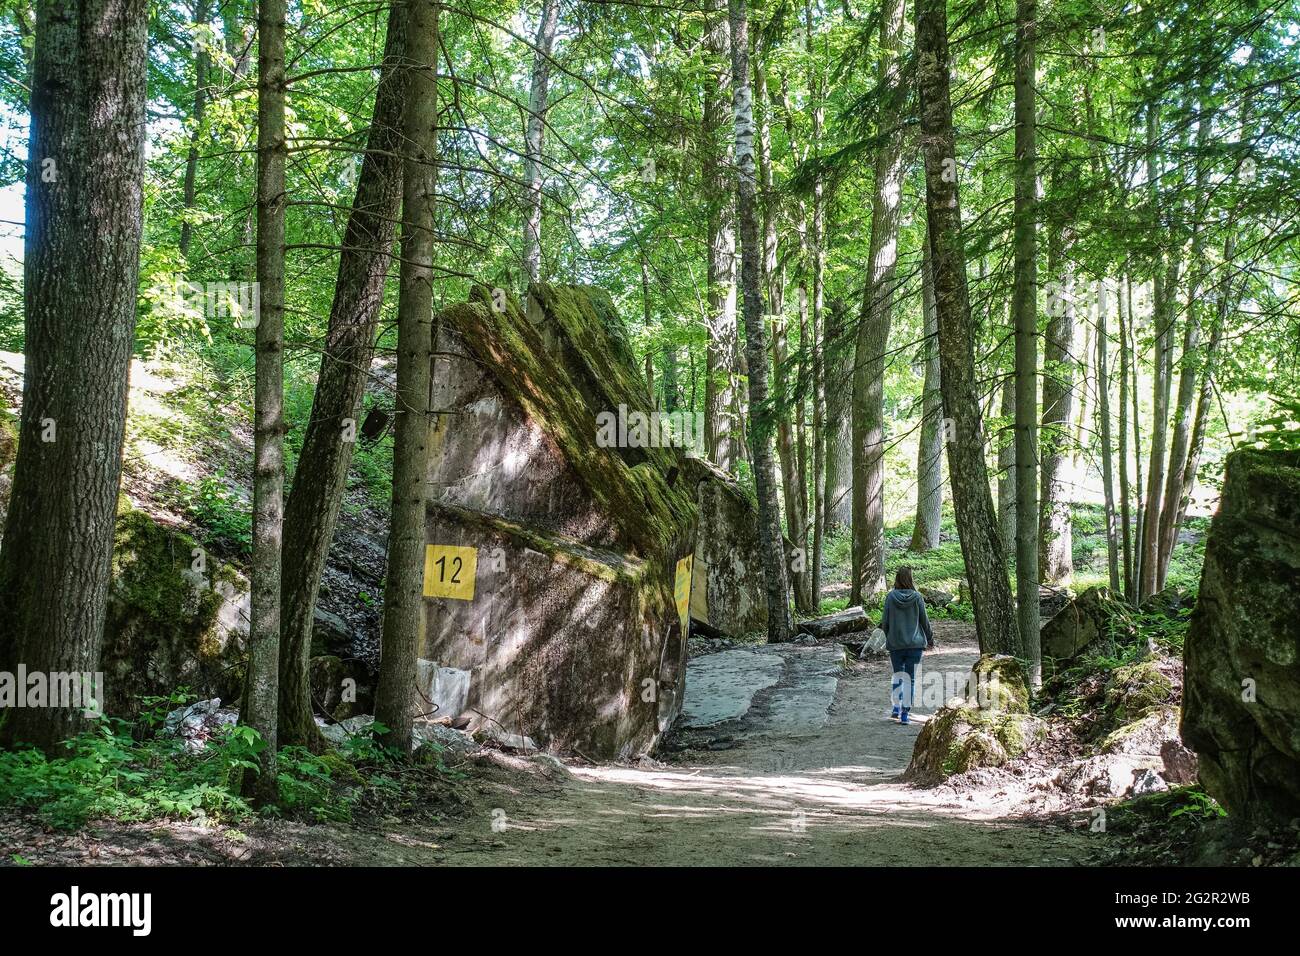 Gierloz, Poland. 2nd June, 2021. People visiting the WWII era Adolf Hitler's quarters hidden in a forest near Gierloz, Poland, are seen on 3 June 2021 r Wolf's Lair (ger. Wolfsschanze) ruins of Adolf Hilter's war headquarters was a hidden town in the woods consisting of 200 buildings: shelters, barracks, 2 airports, a power station, a railway station, air-conditioners, water supplies, heat-generating plants and two teleprinters (Photo by Vadim Pacajev/Sipa USA) Credit: Sipa USA/Alamy Live News Stock Photo